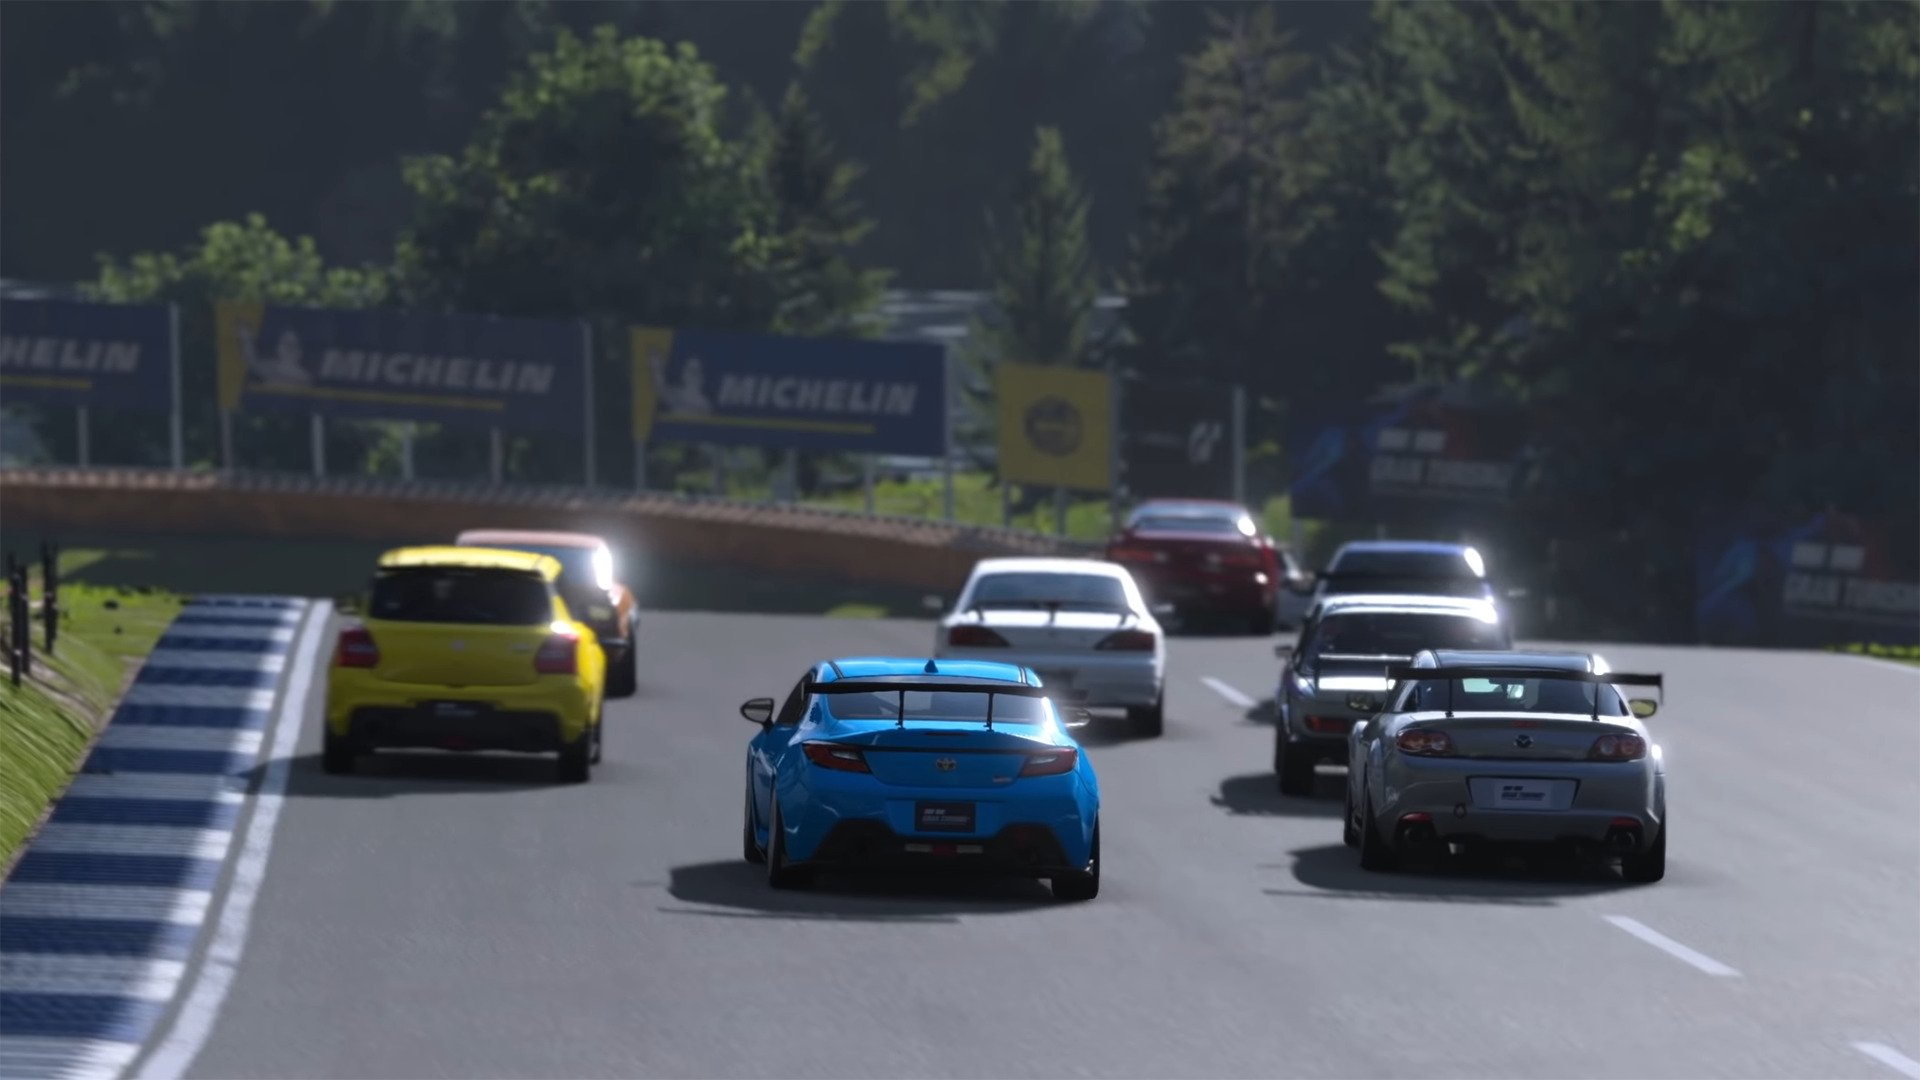 Gran Turismo 7 Complete Car List - Every Car Revealed!